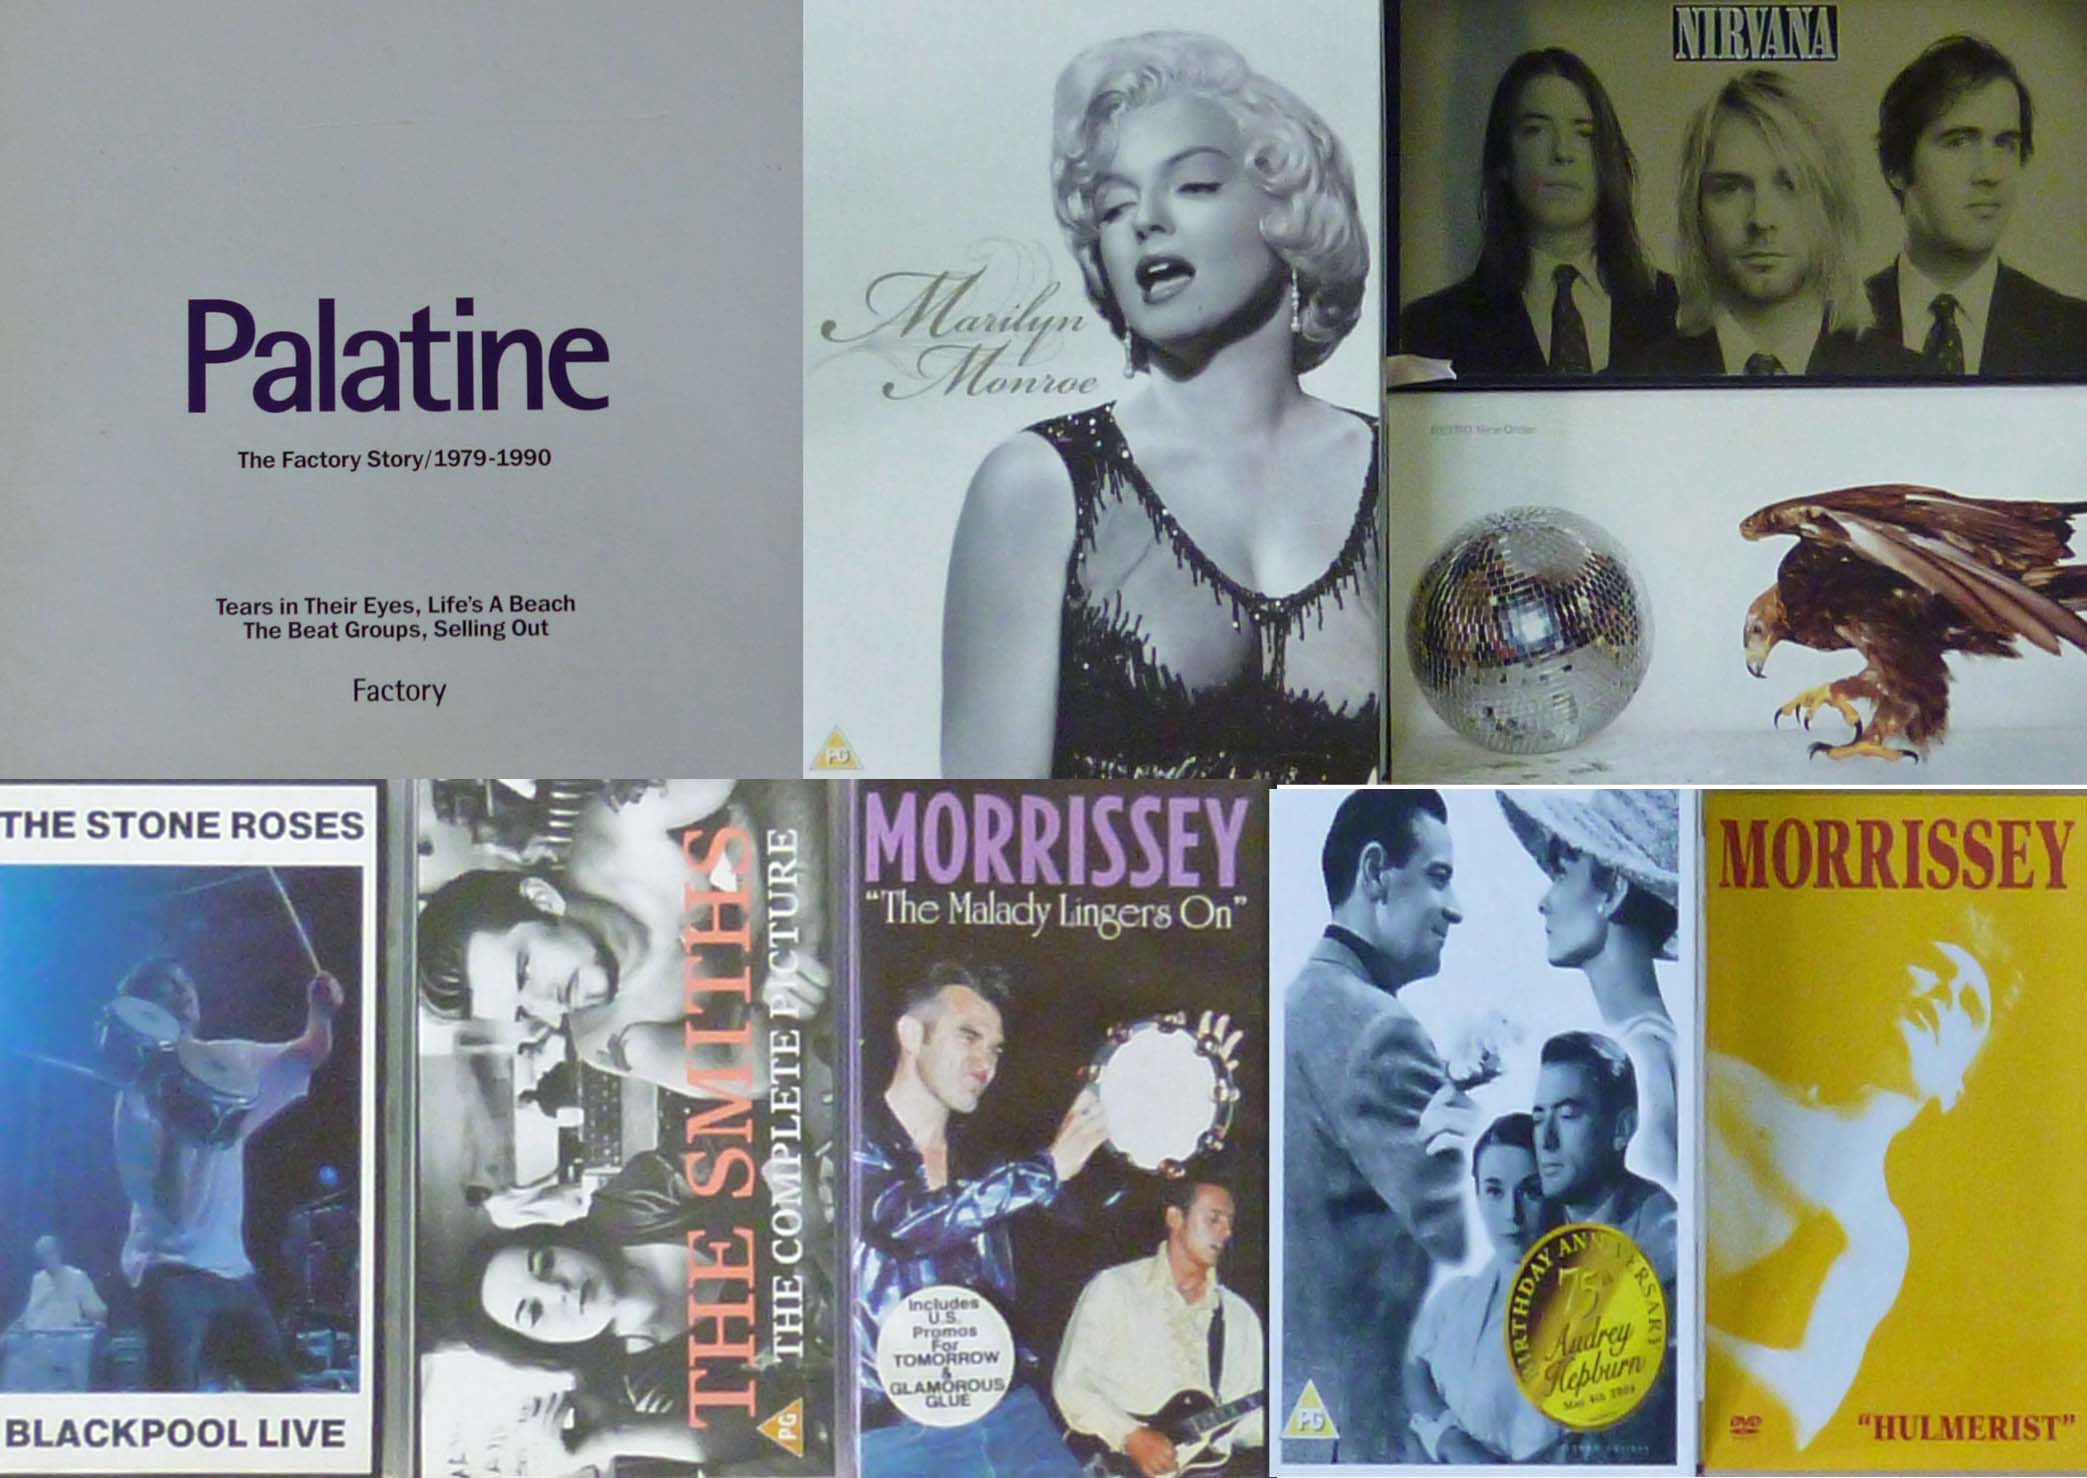 Quantity of CDs DVDs and VHS. Includes 'Palatine' the factory story 1979 - 1990, four CD box set